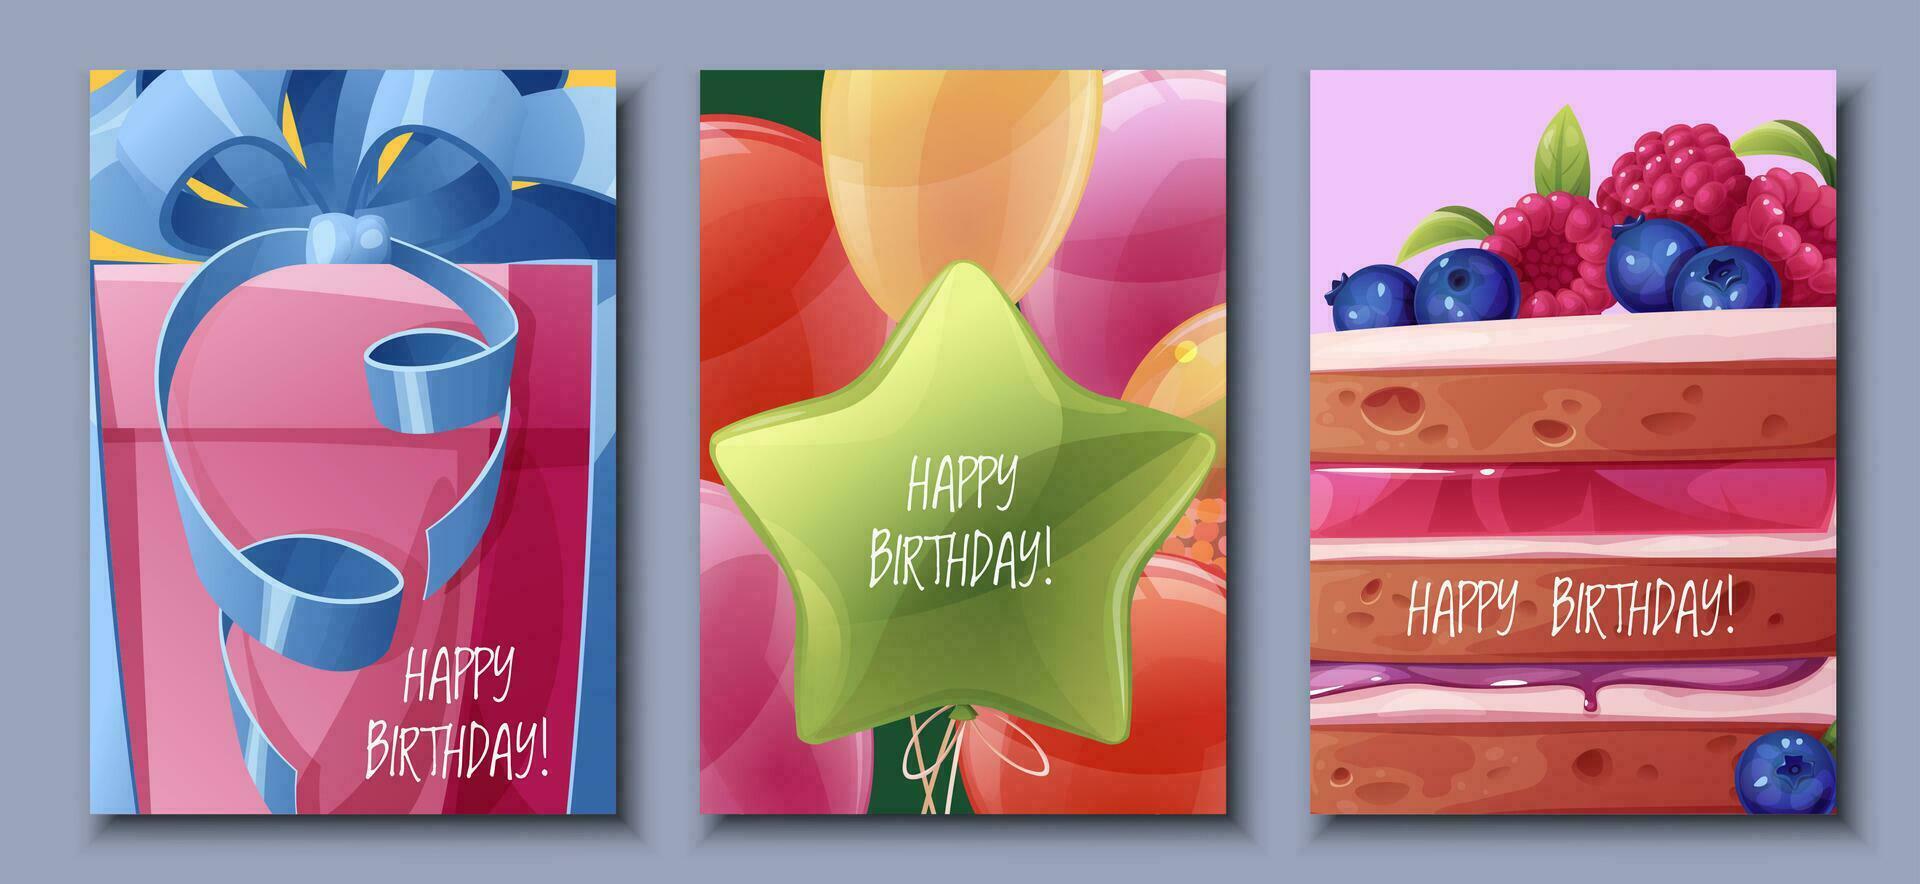 Set birthday greeting card design. Banner, flyer template with cake, balloons, gift box with bow. Happy birthday Invitation design for holiday, anniversary, party vector